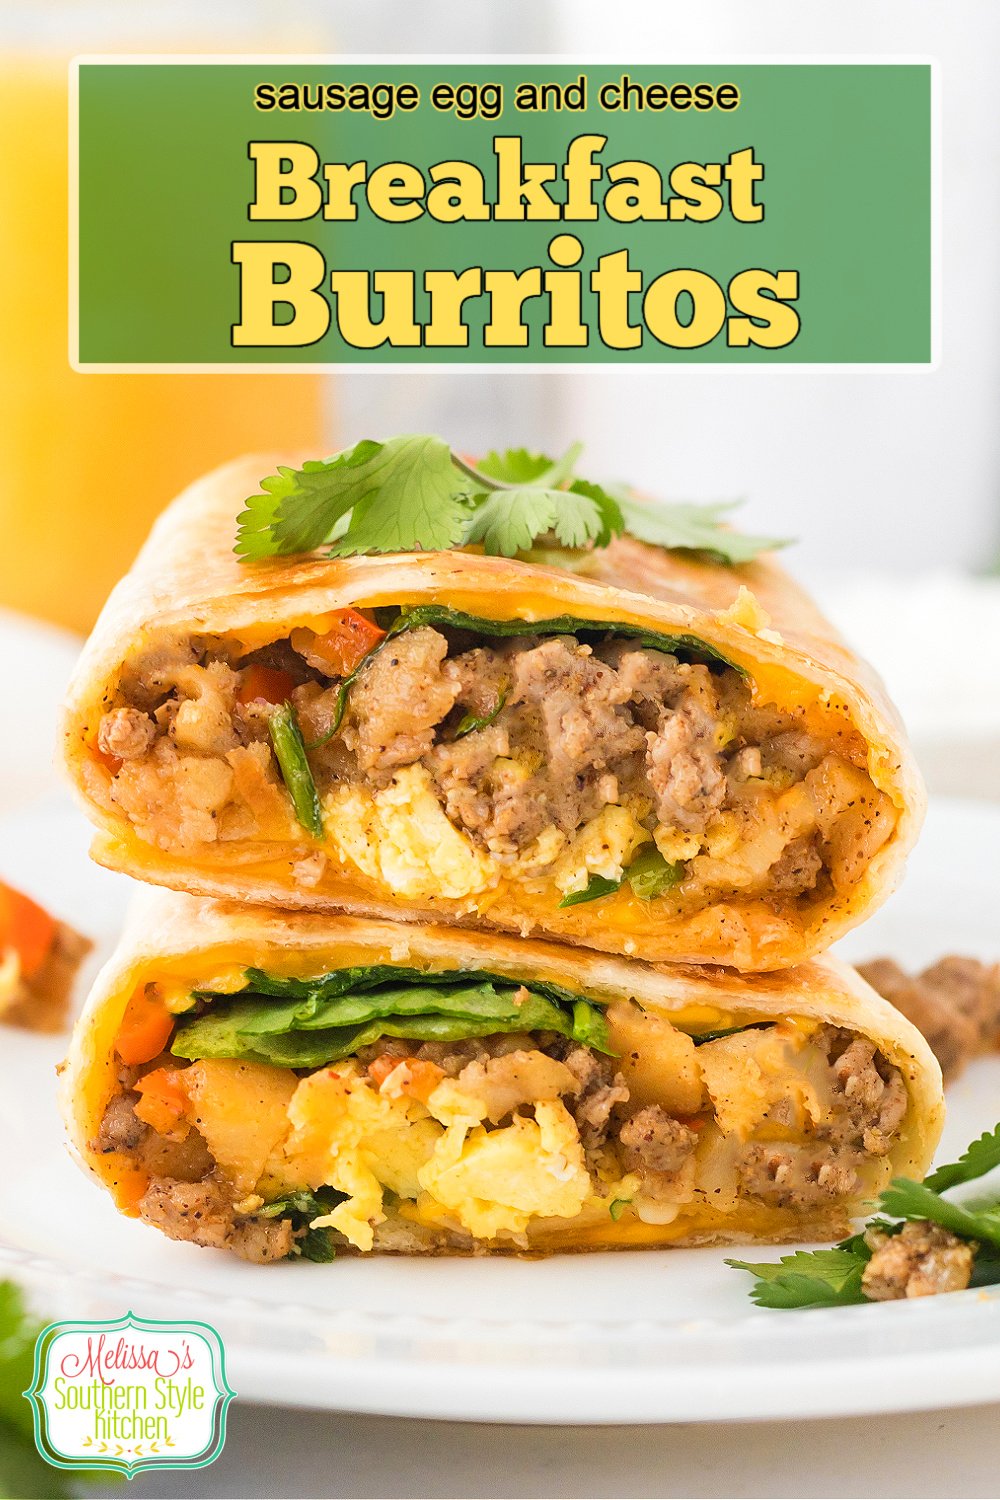 These loaded Breakfast Burritos are stuffed with sausage, eggs, hash browns and fresh spinach all held together with cheddar cheese #burritos #breakfastburritos #easybreakfastburritos #sausageburritos #burritorecipes #breakfastrecipes #eggburritos